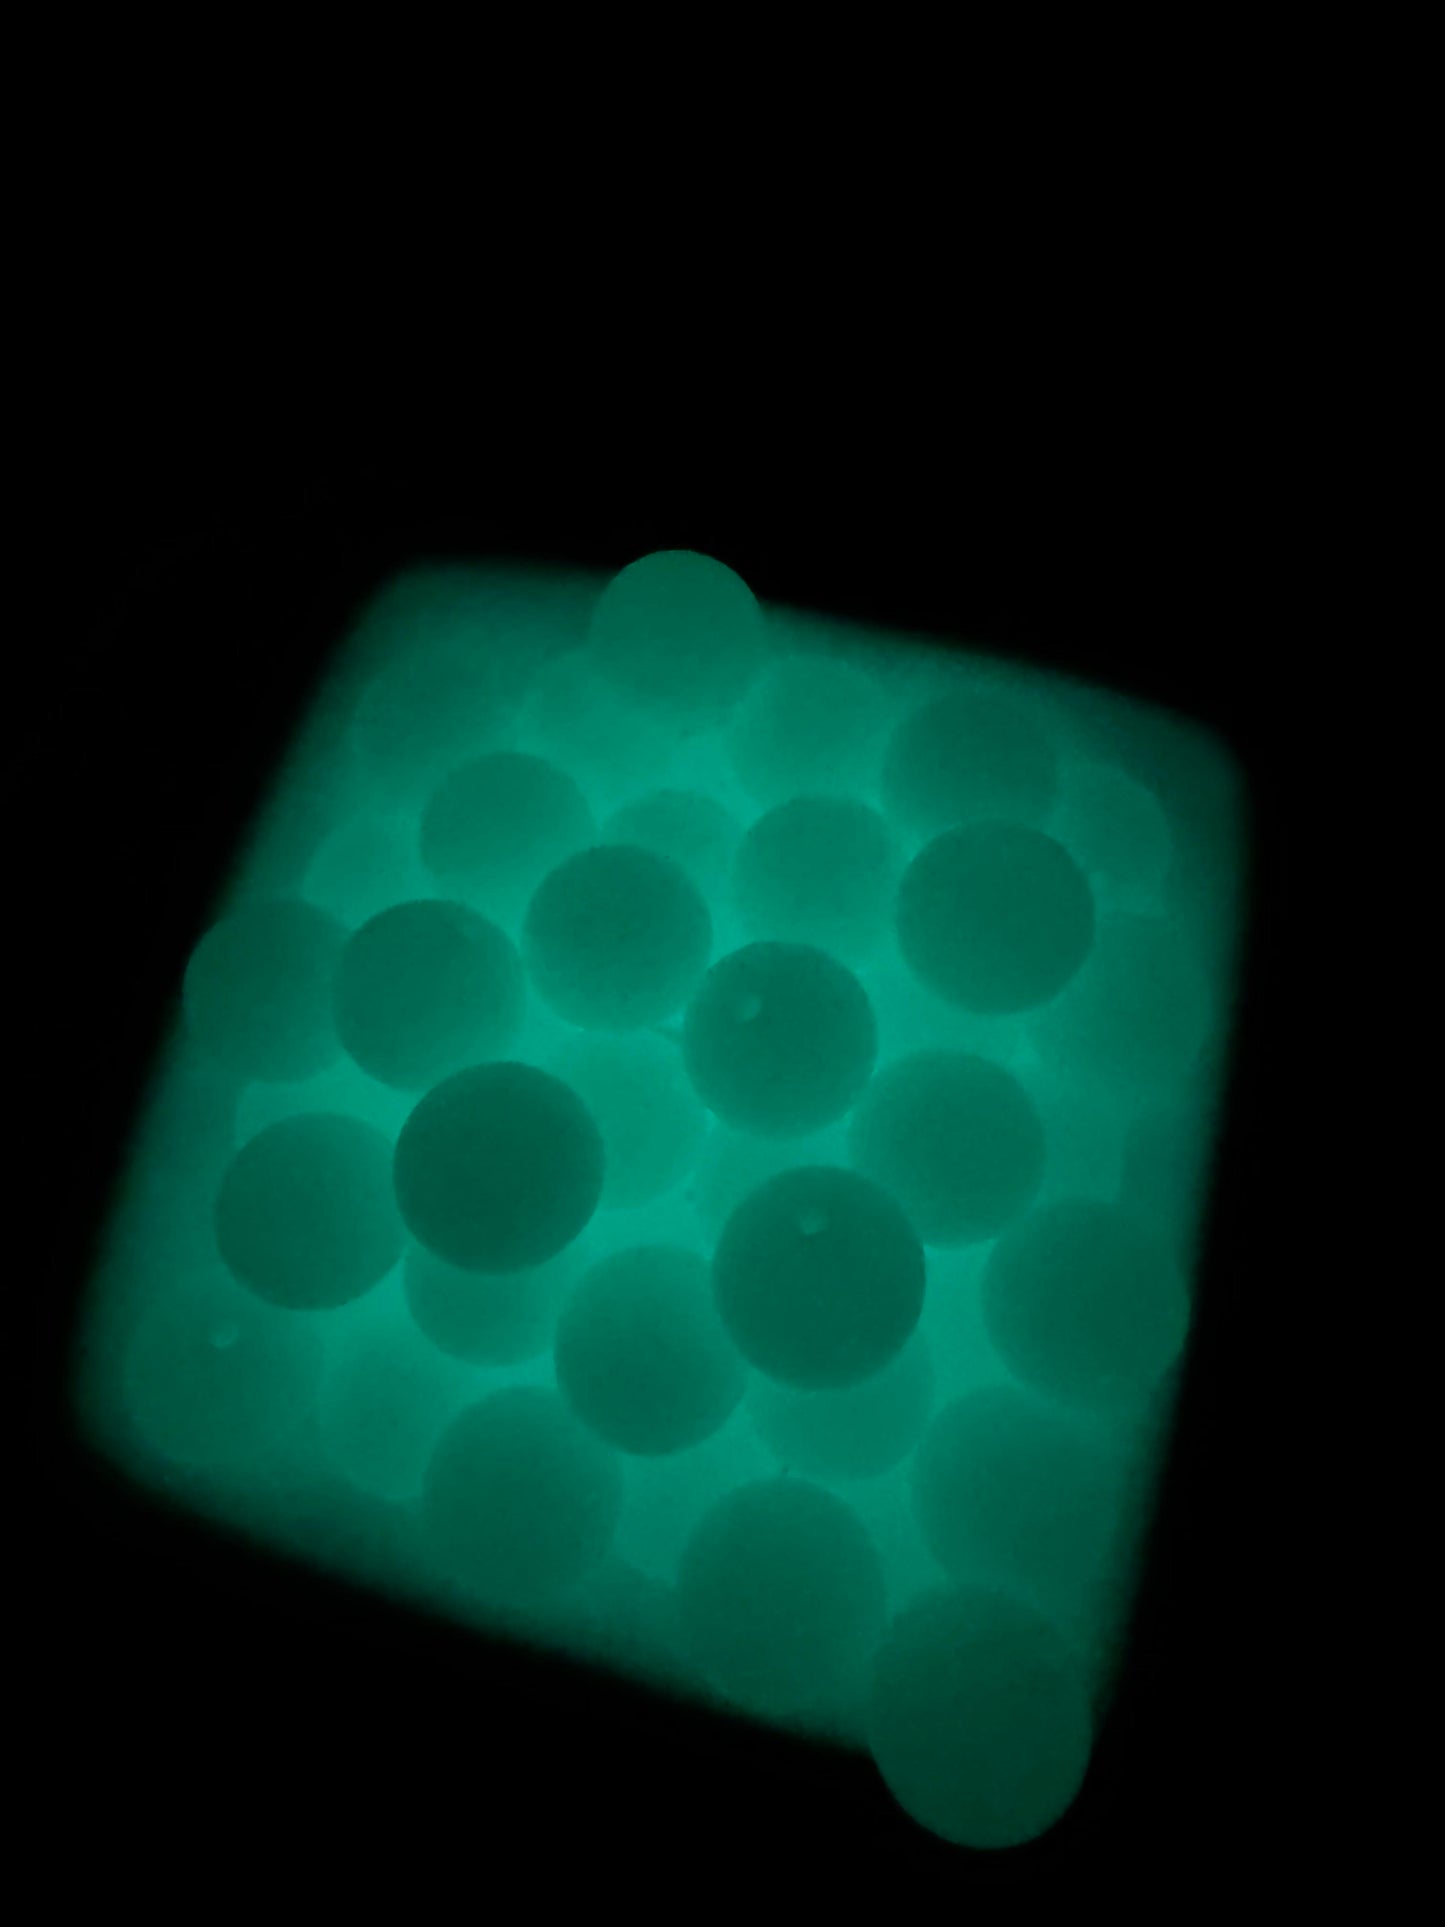 15mm Glow-In-The-Dark Silicone Bead - Turquoise Glow